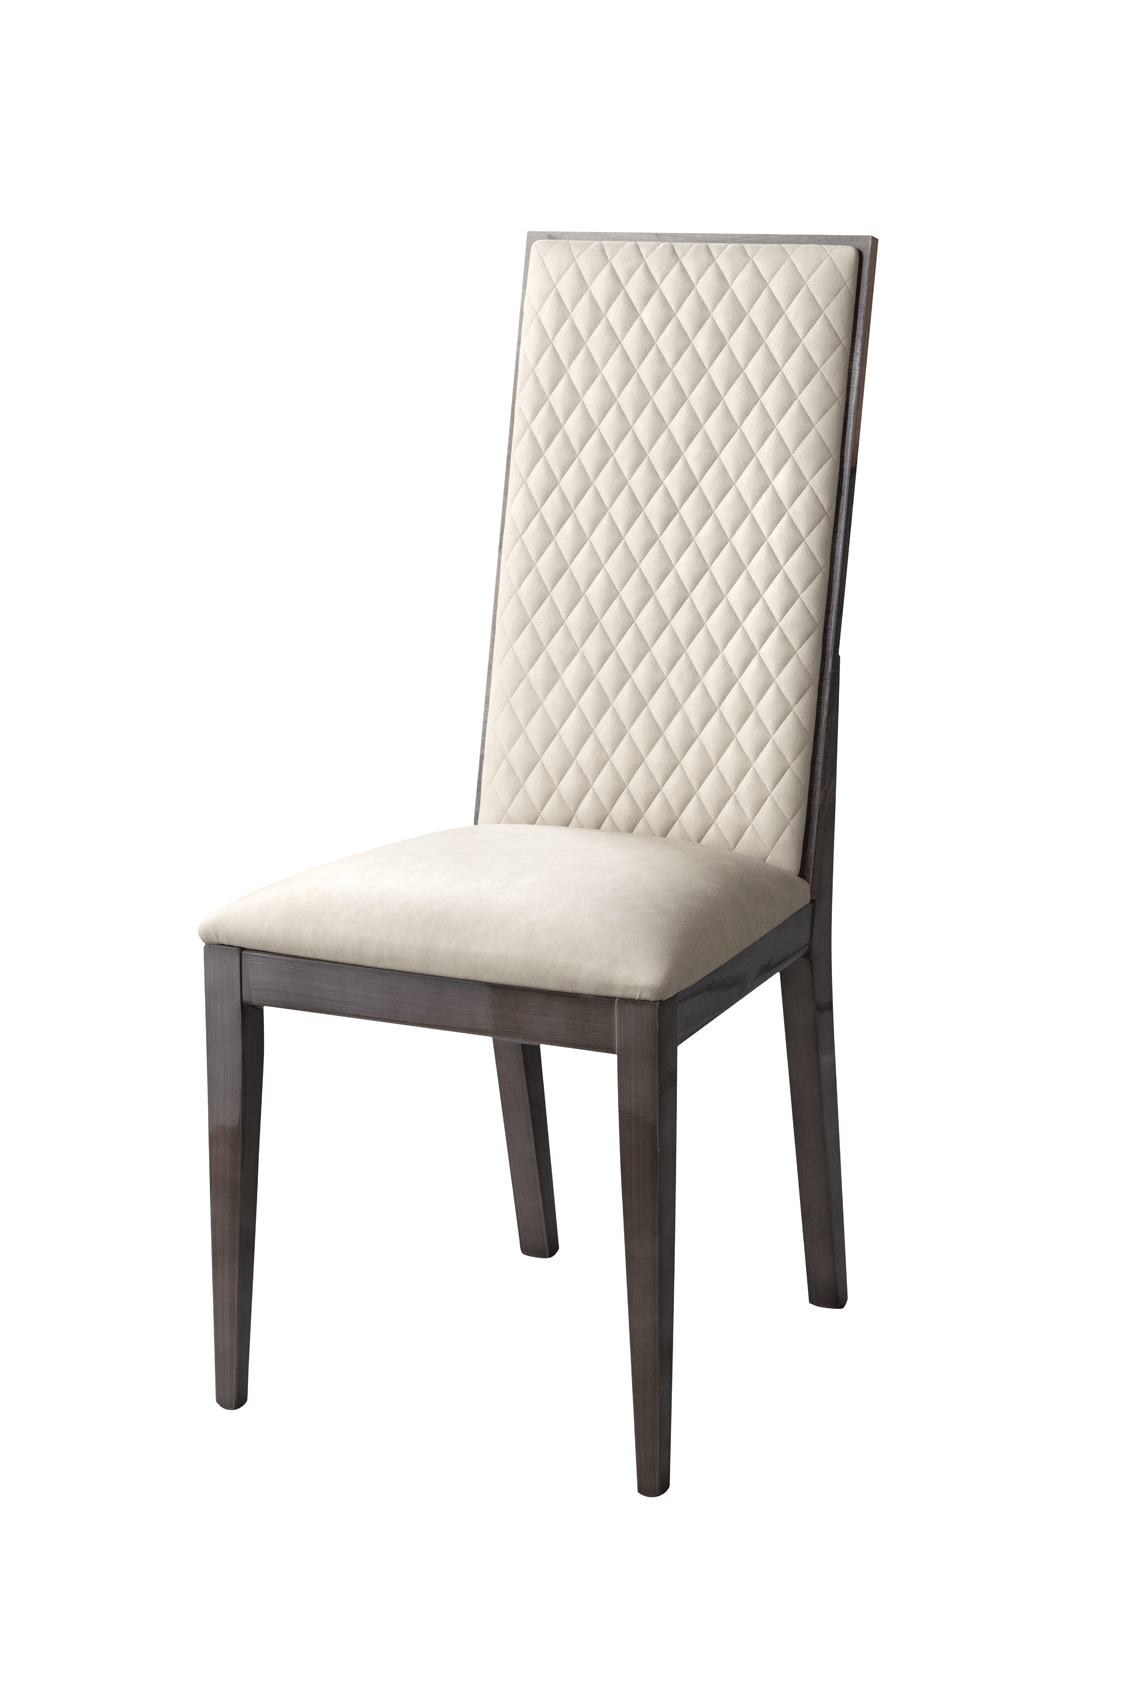 Brands Status Modern Collections, Italy Medea Side Chair